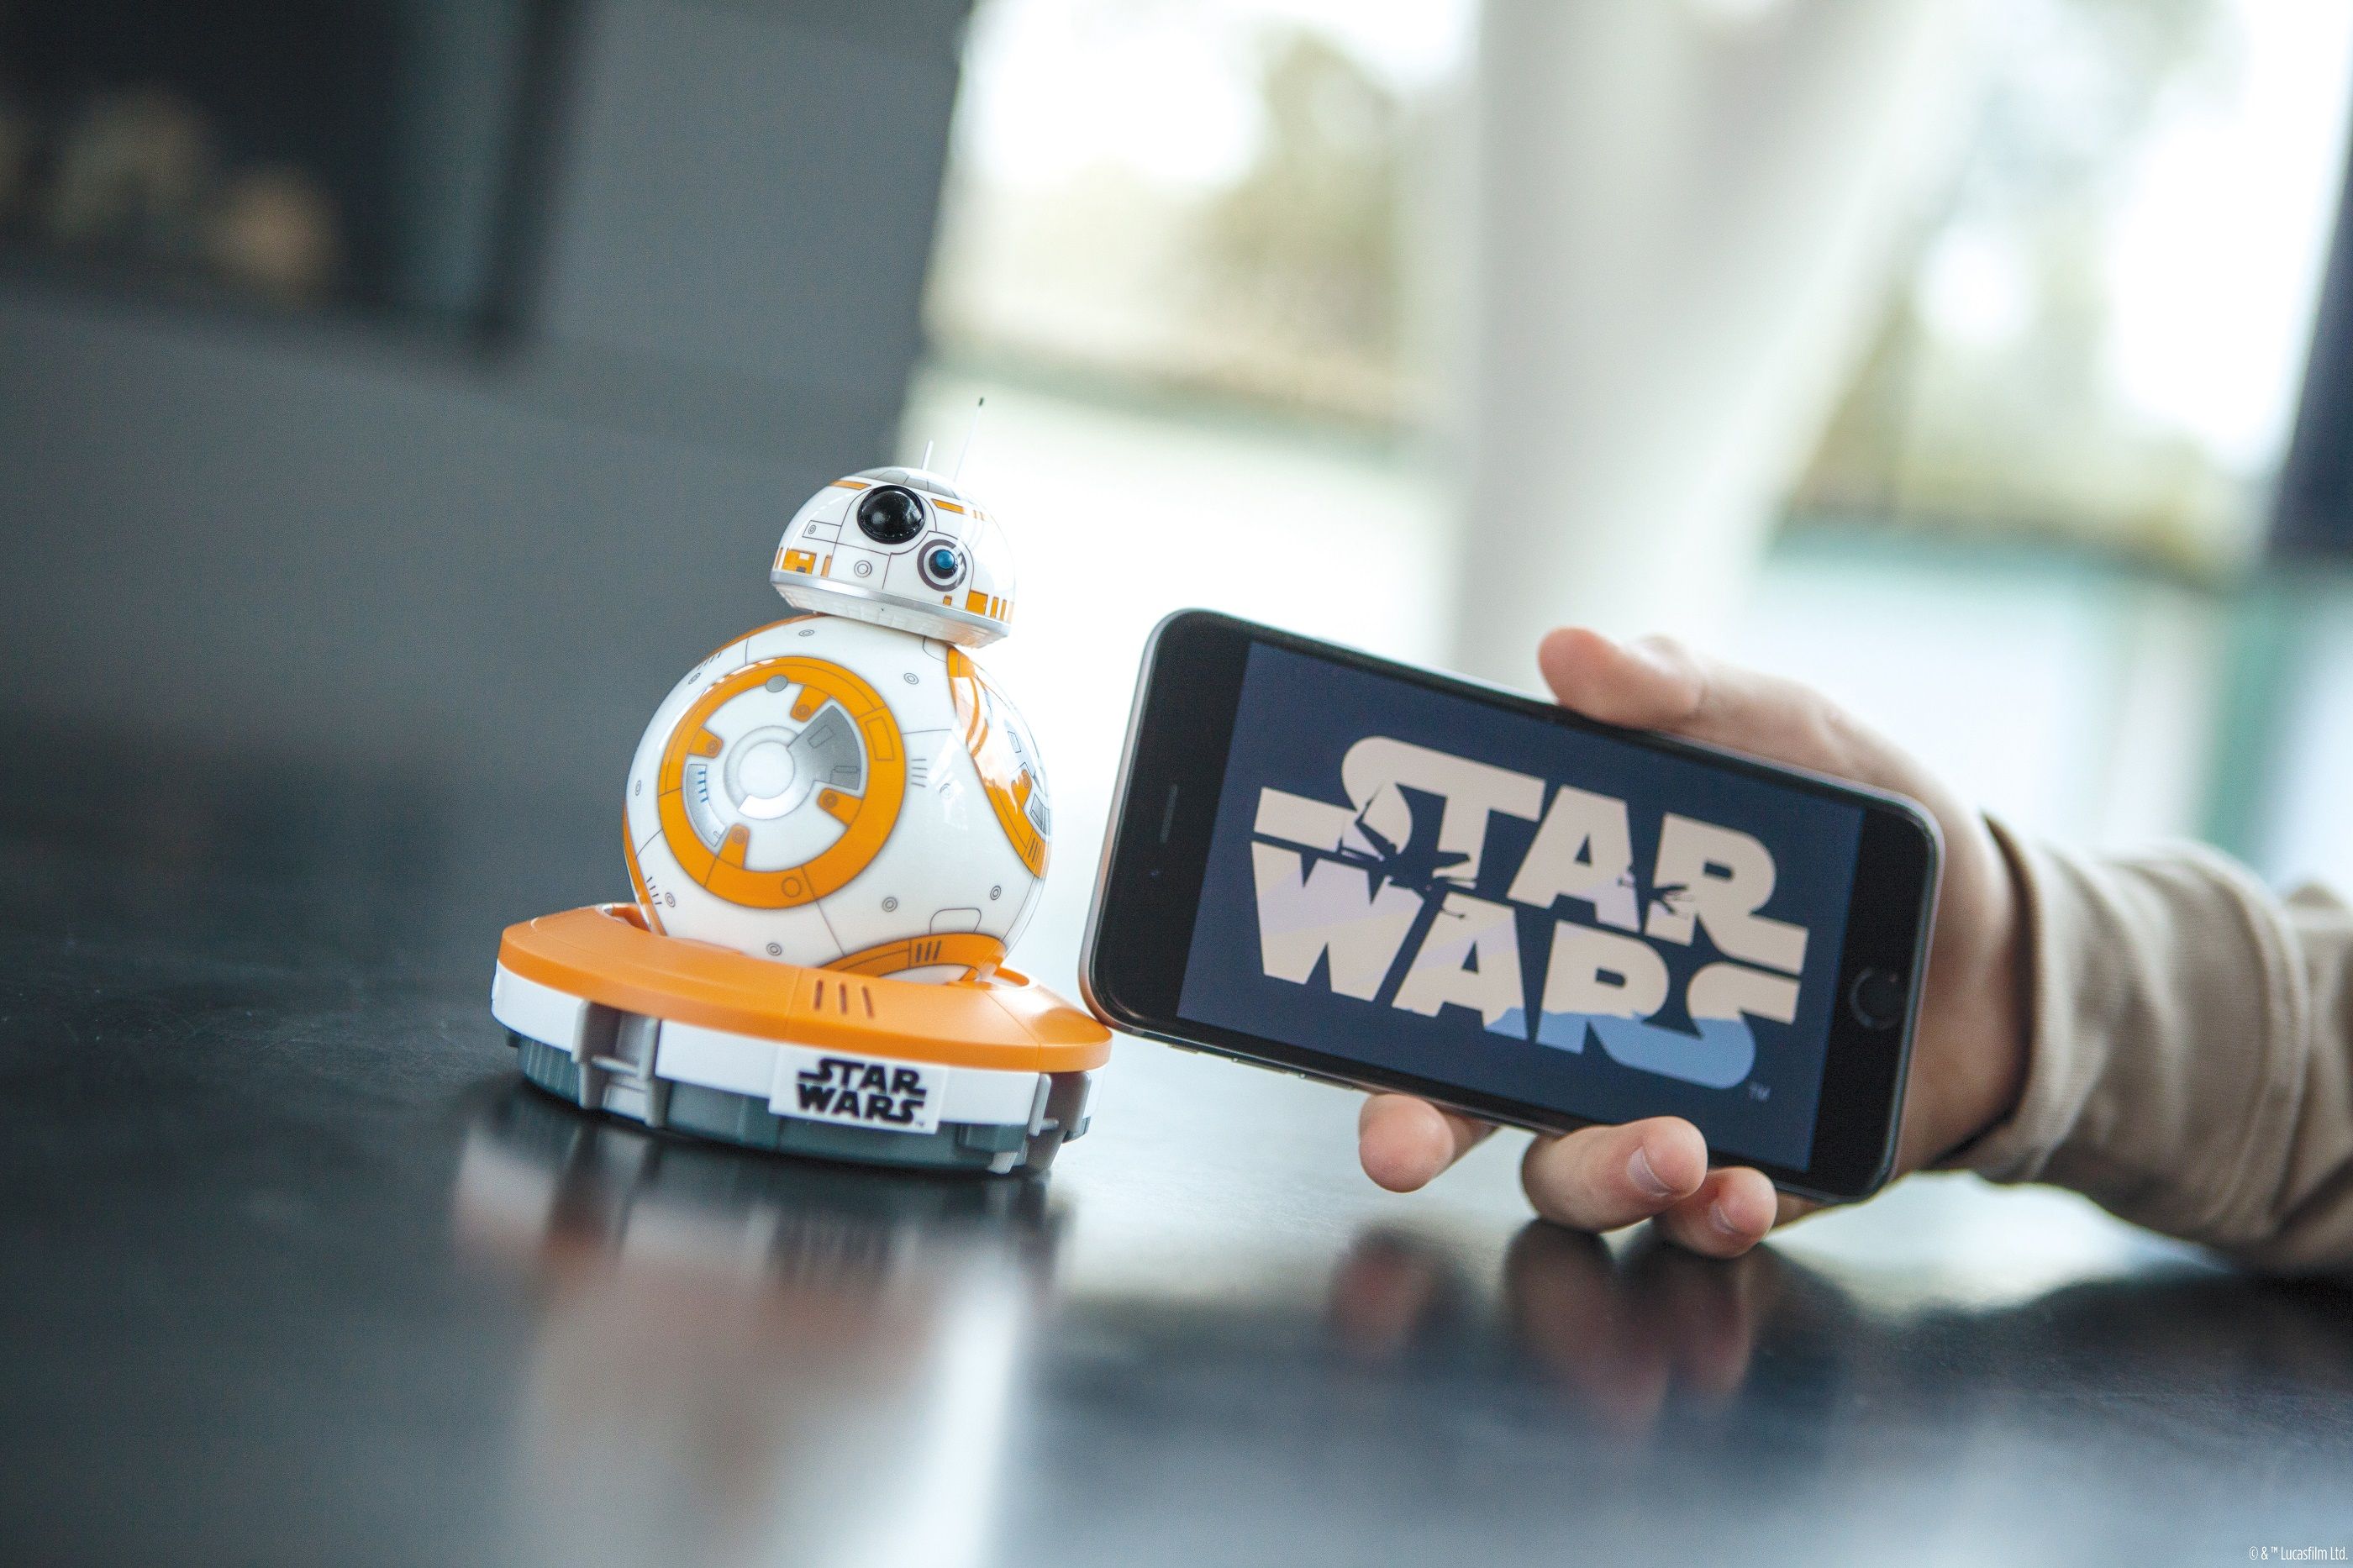 Star Wars Fans Can Now Have Their Own App Enabled 8 Droid